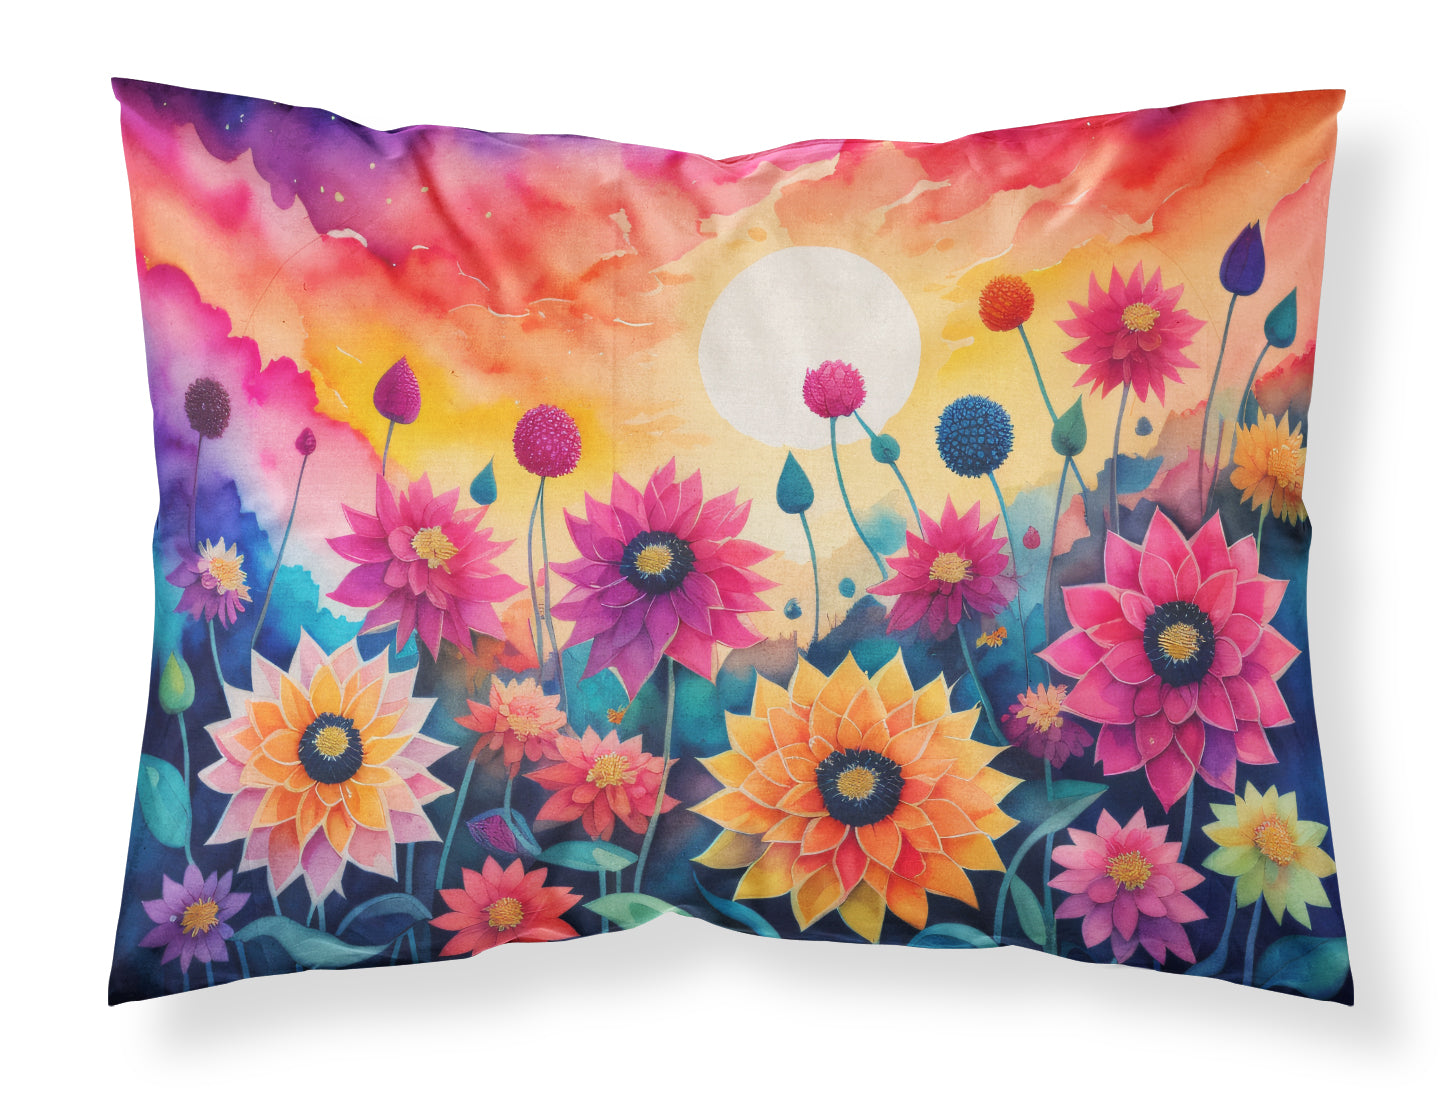 Buy this Dahlias in Color Fabric Standard Pillowcase